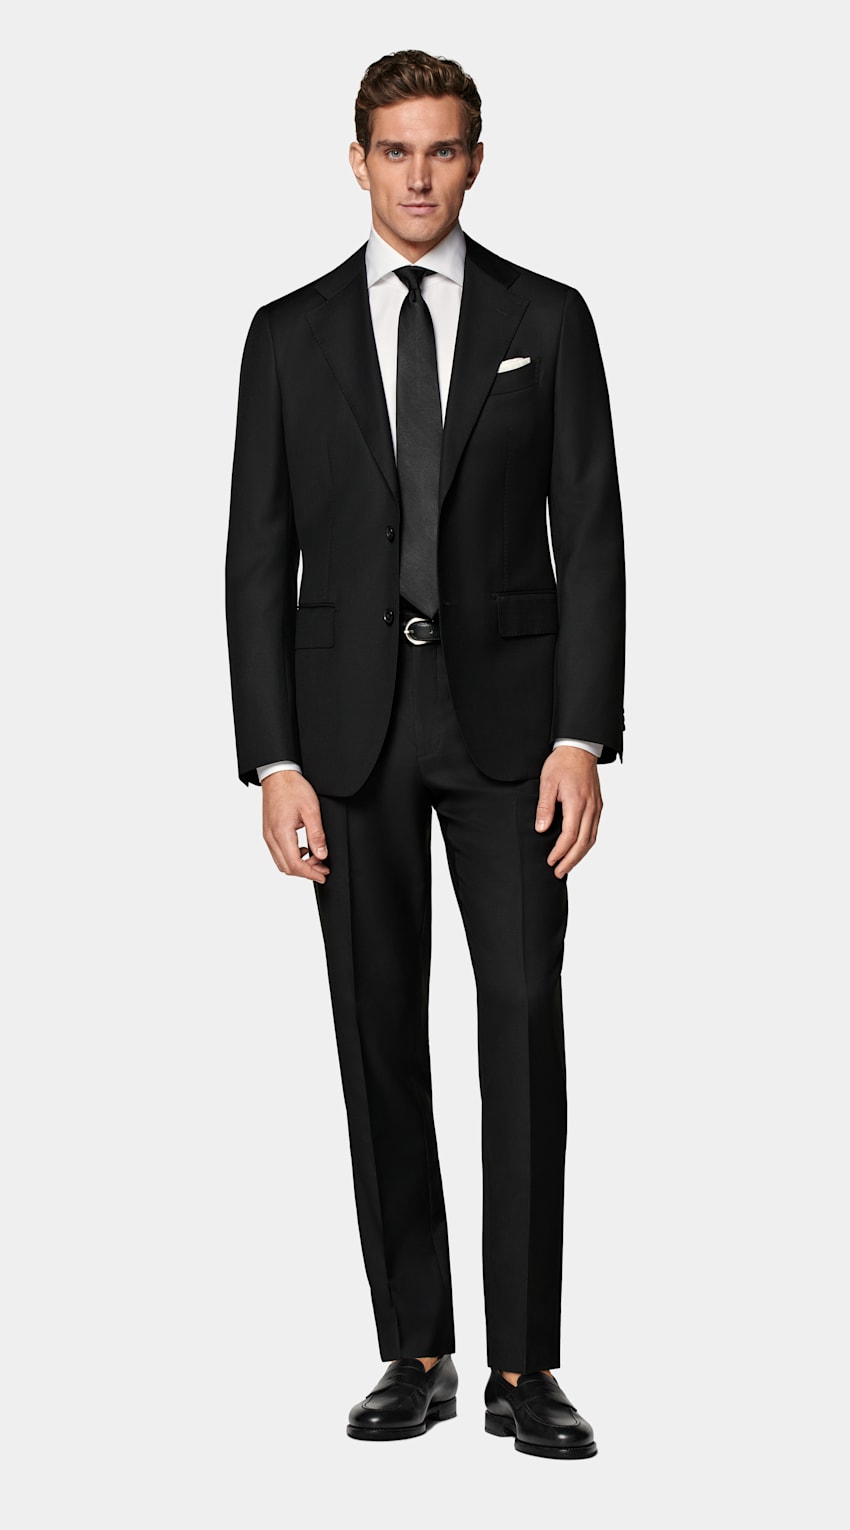 SUITSUPPLY All Season Pure S110's Wool by Vitale Barberis Canonico, Italy Black Tailored Fit Havana Suit